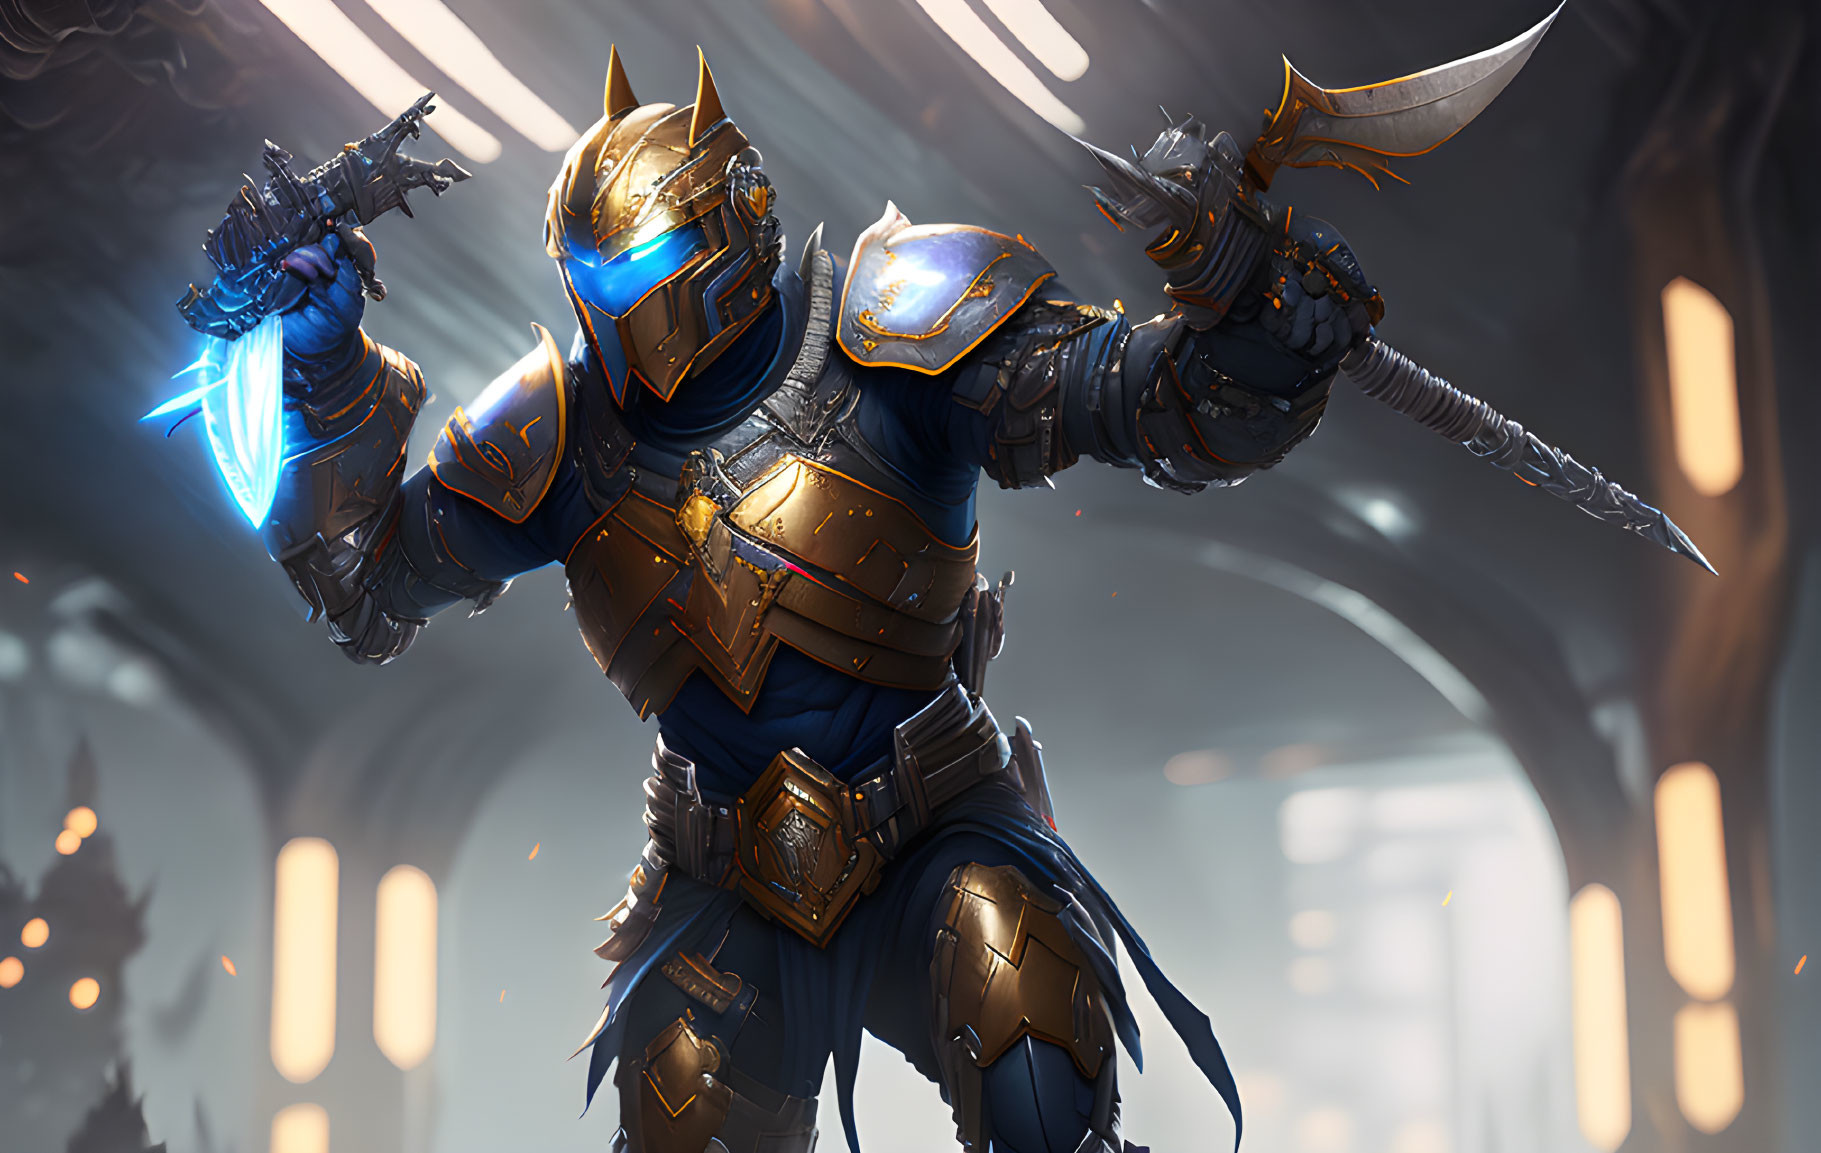 Futuristic knight in blue and gold armor with energy sword in grand hall